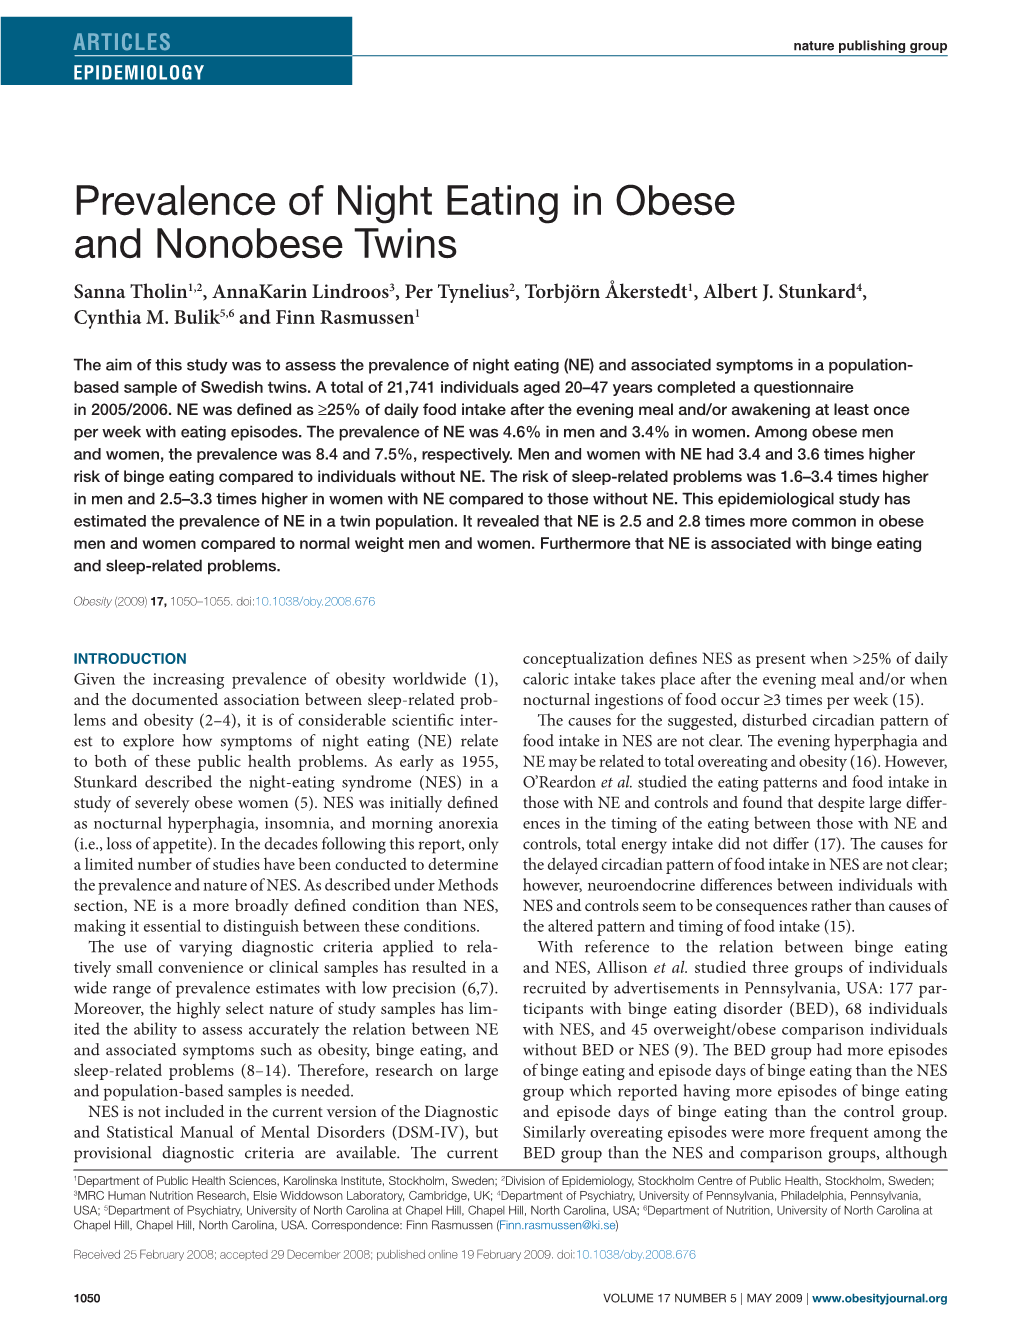 Prevalence of Night Eating in Obese and Nonobese Twins Sanna Tholin1,2, Annakarin Lindroos3, Per Tynelius2, Torbjörn Åkerstedt1, Albert J